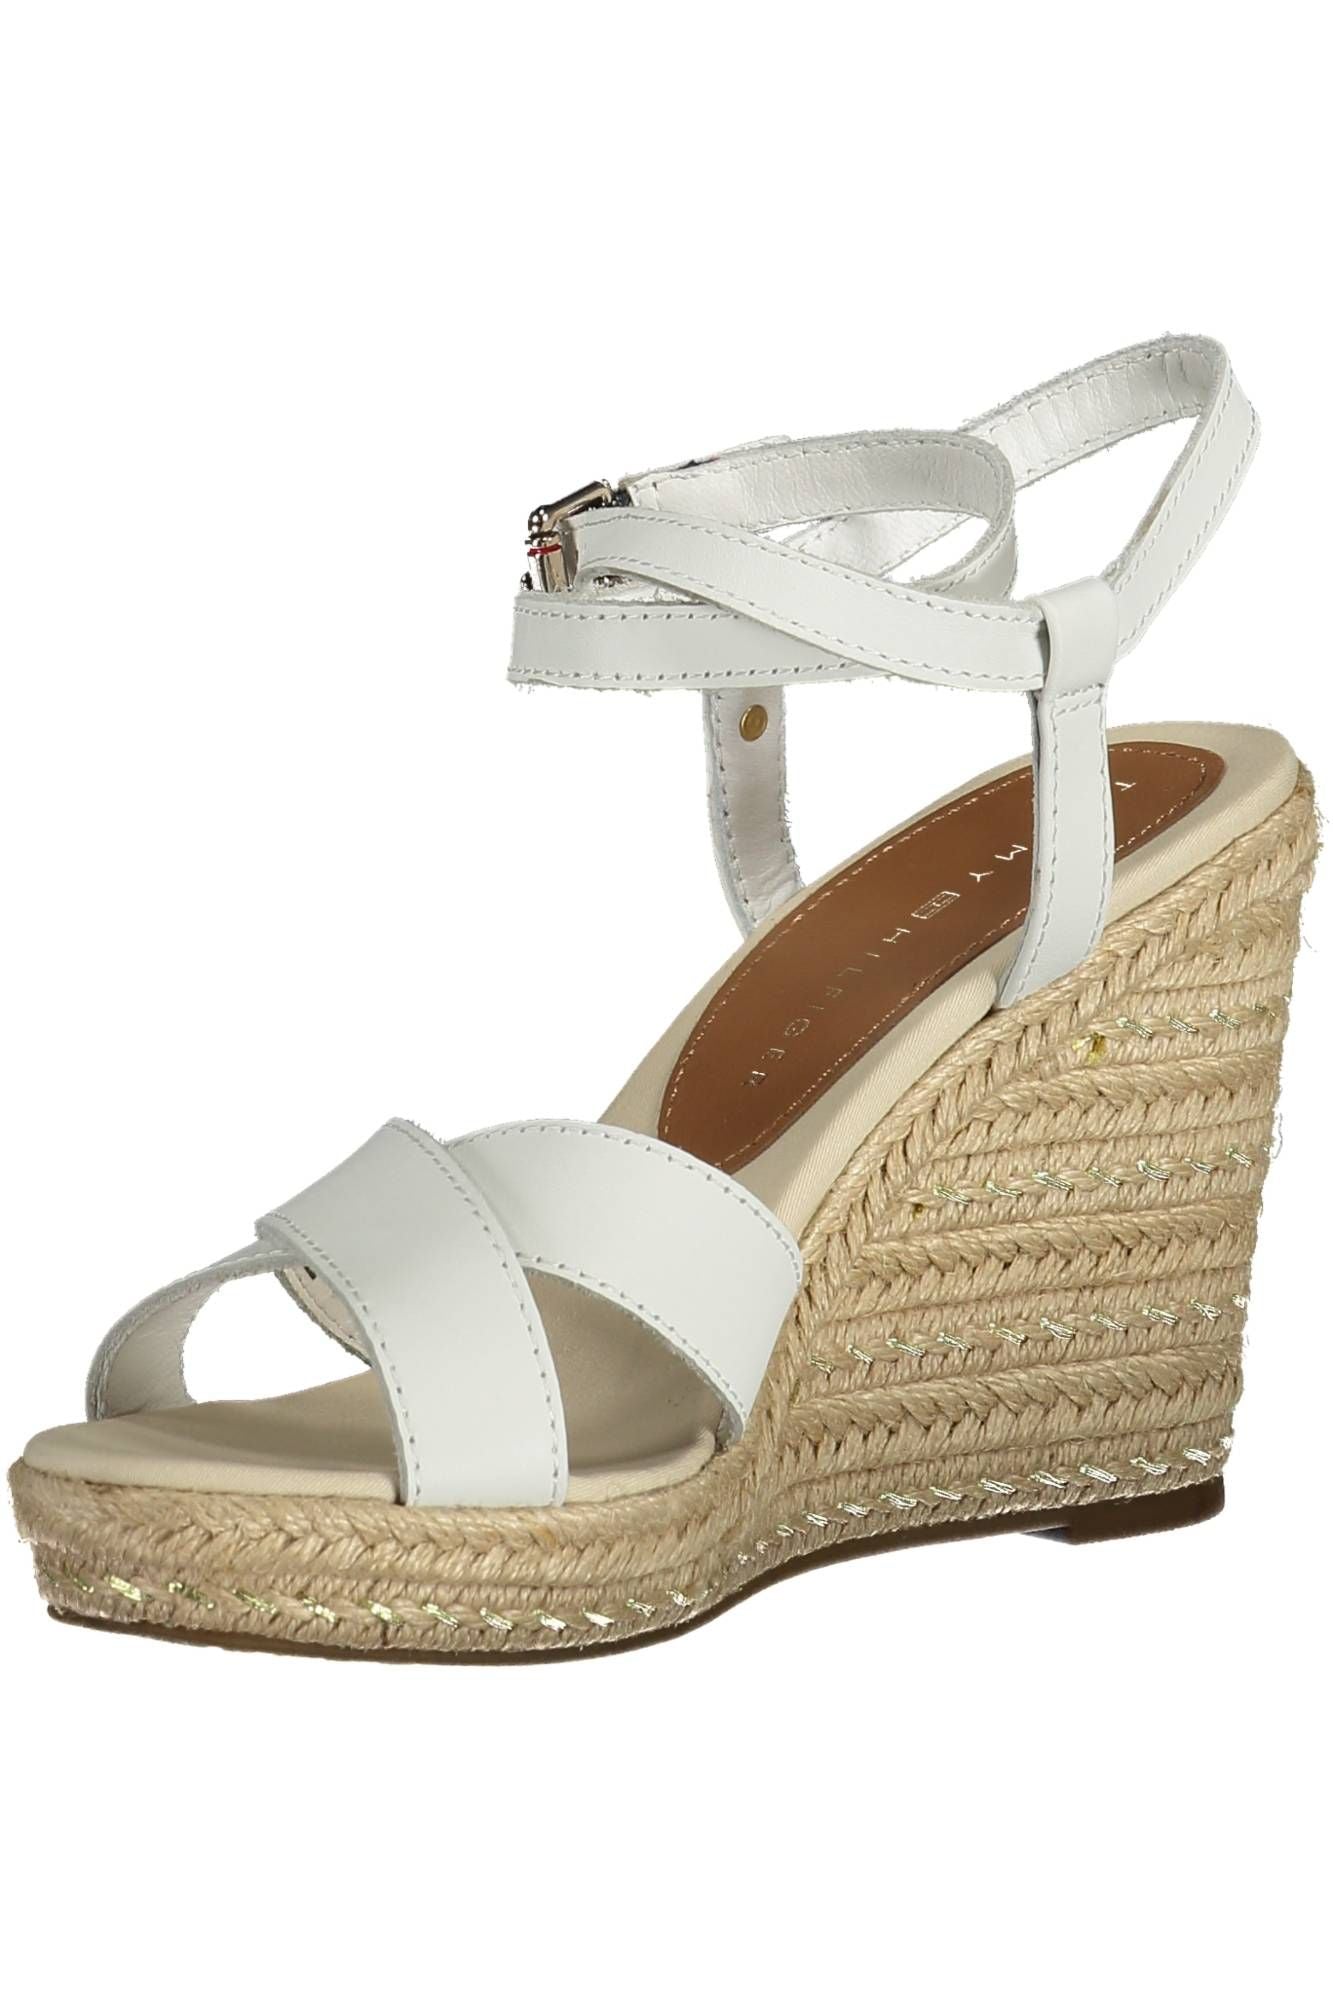 Chic Ankle Strap Wedge Sandals